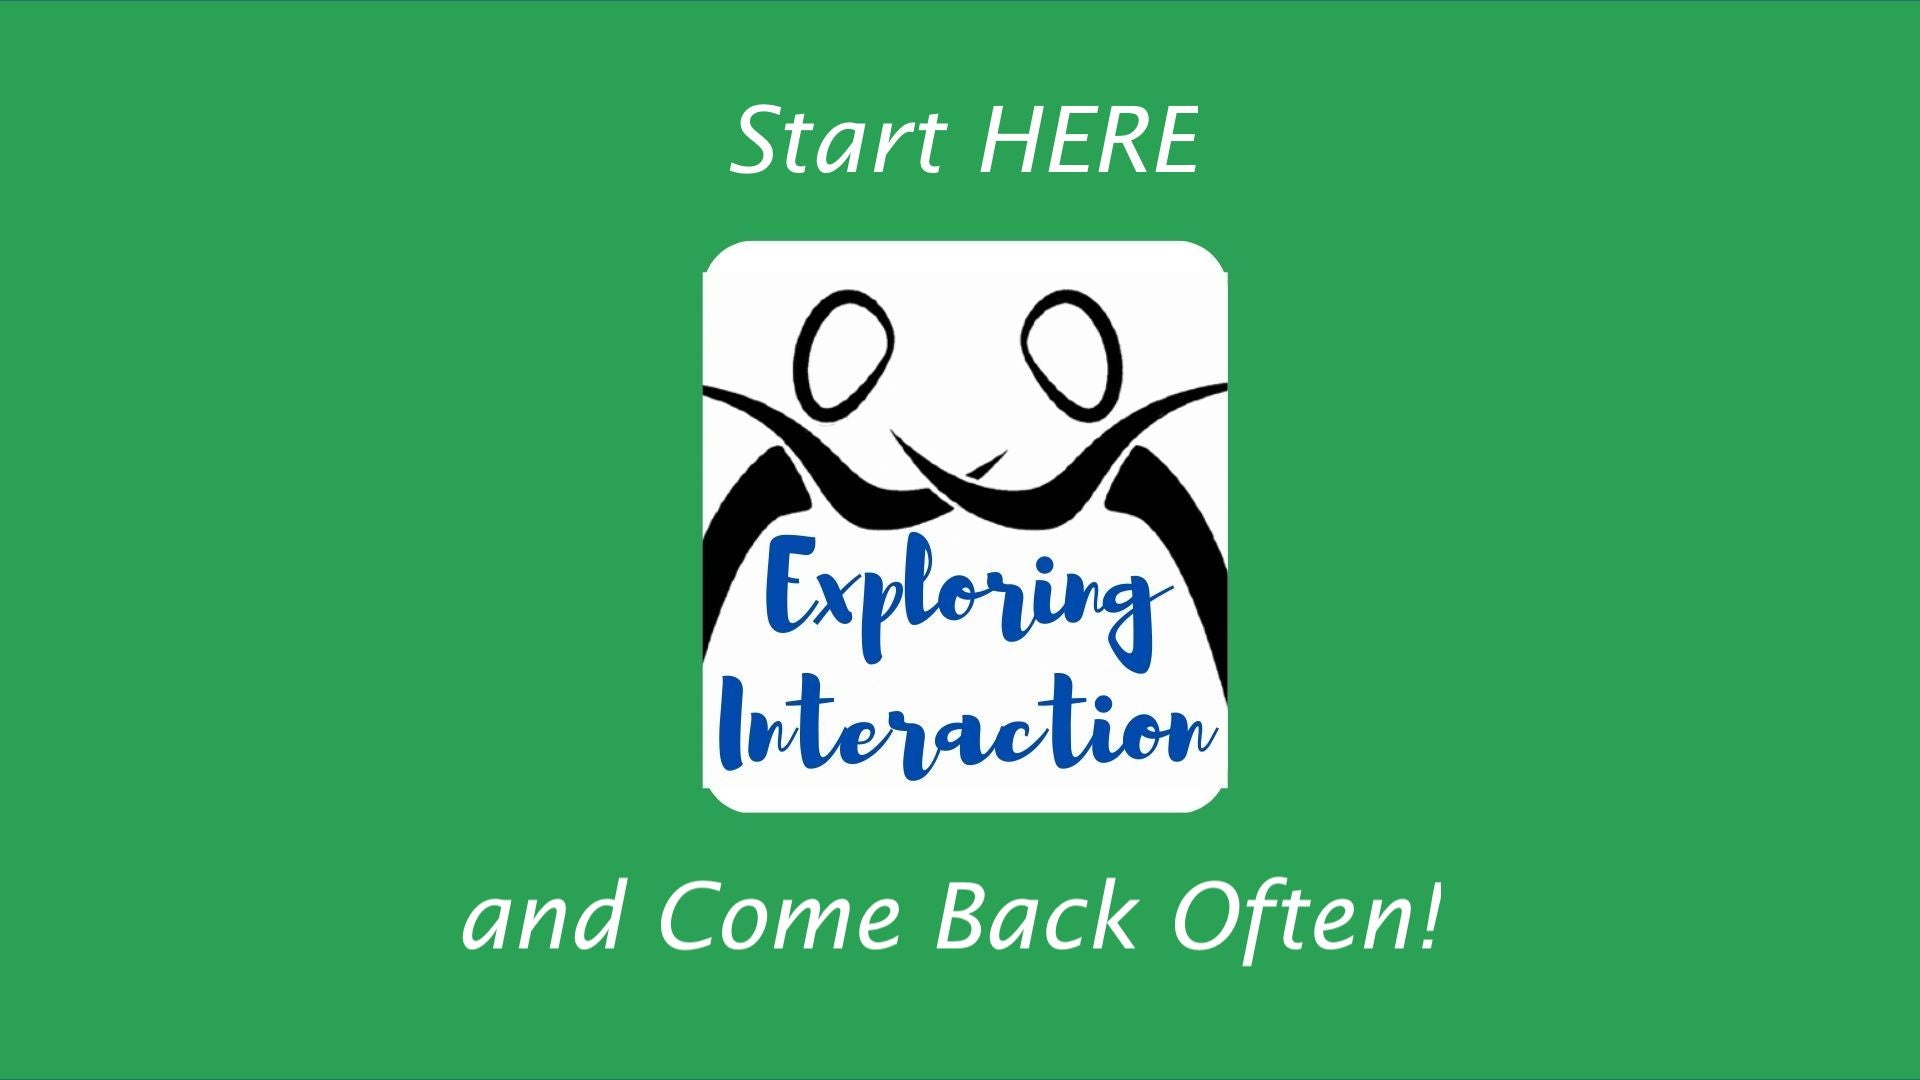 Monthly Exploring Interaction Changes Meeting - 3rd Sundays